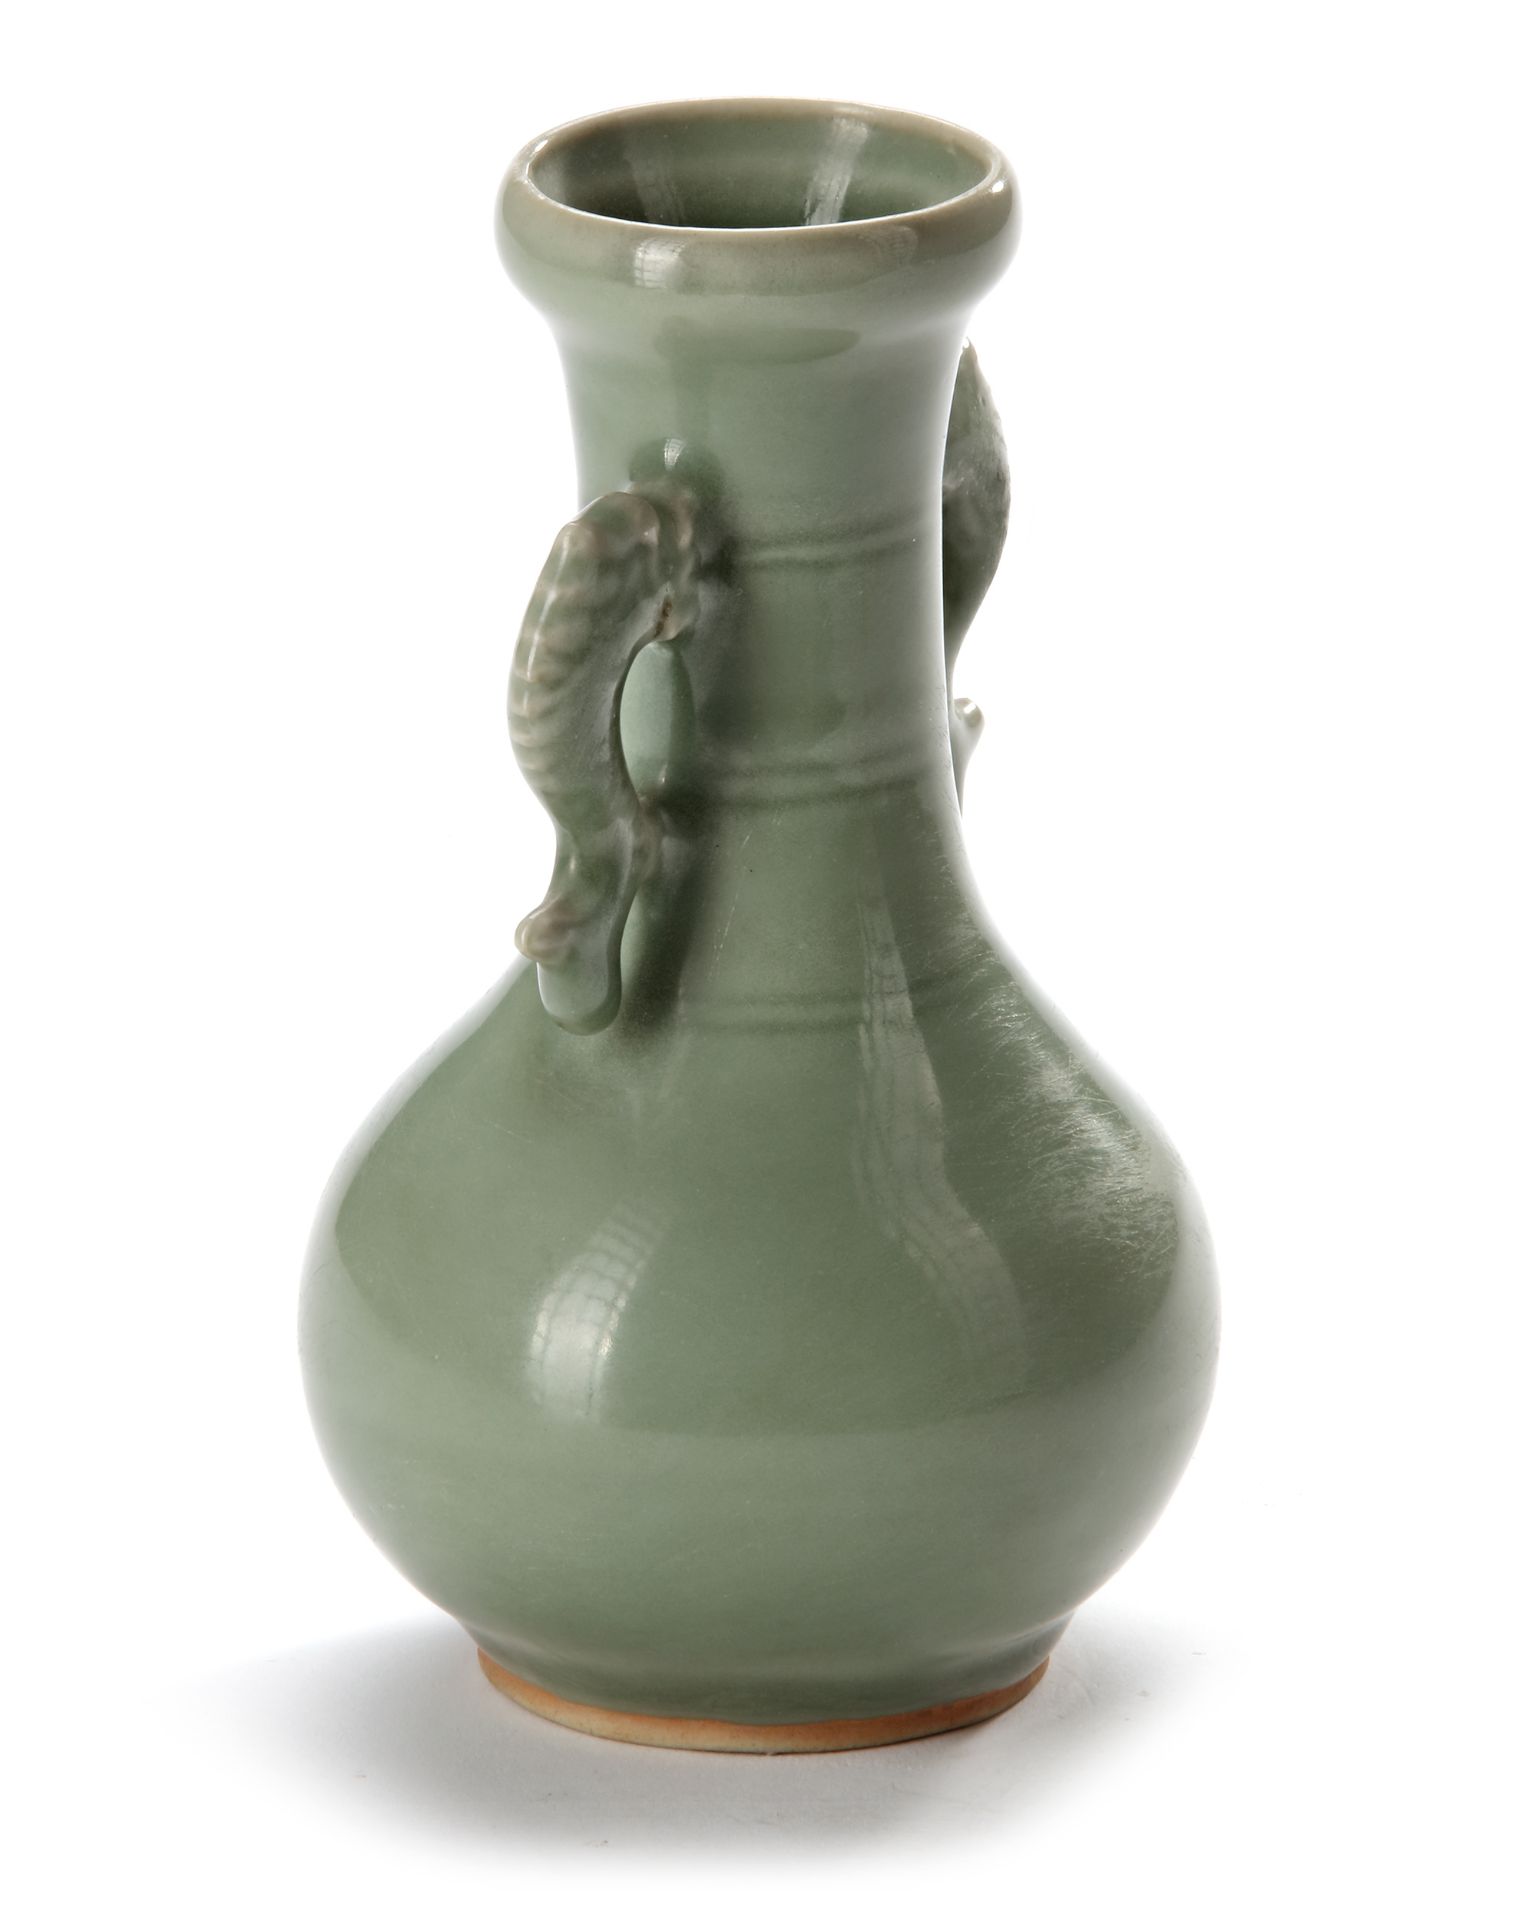 THREE CHINESE LONGQUAN CELADON VASES, SONG DYNASTY (960-1127 ) /YUAN DYNASTY (1271-1368) - Image 4 of 7